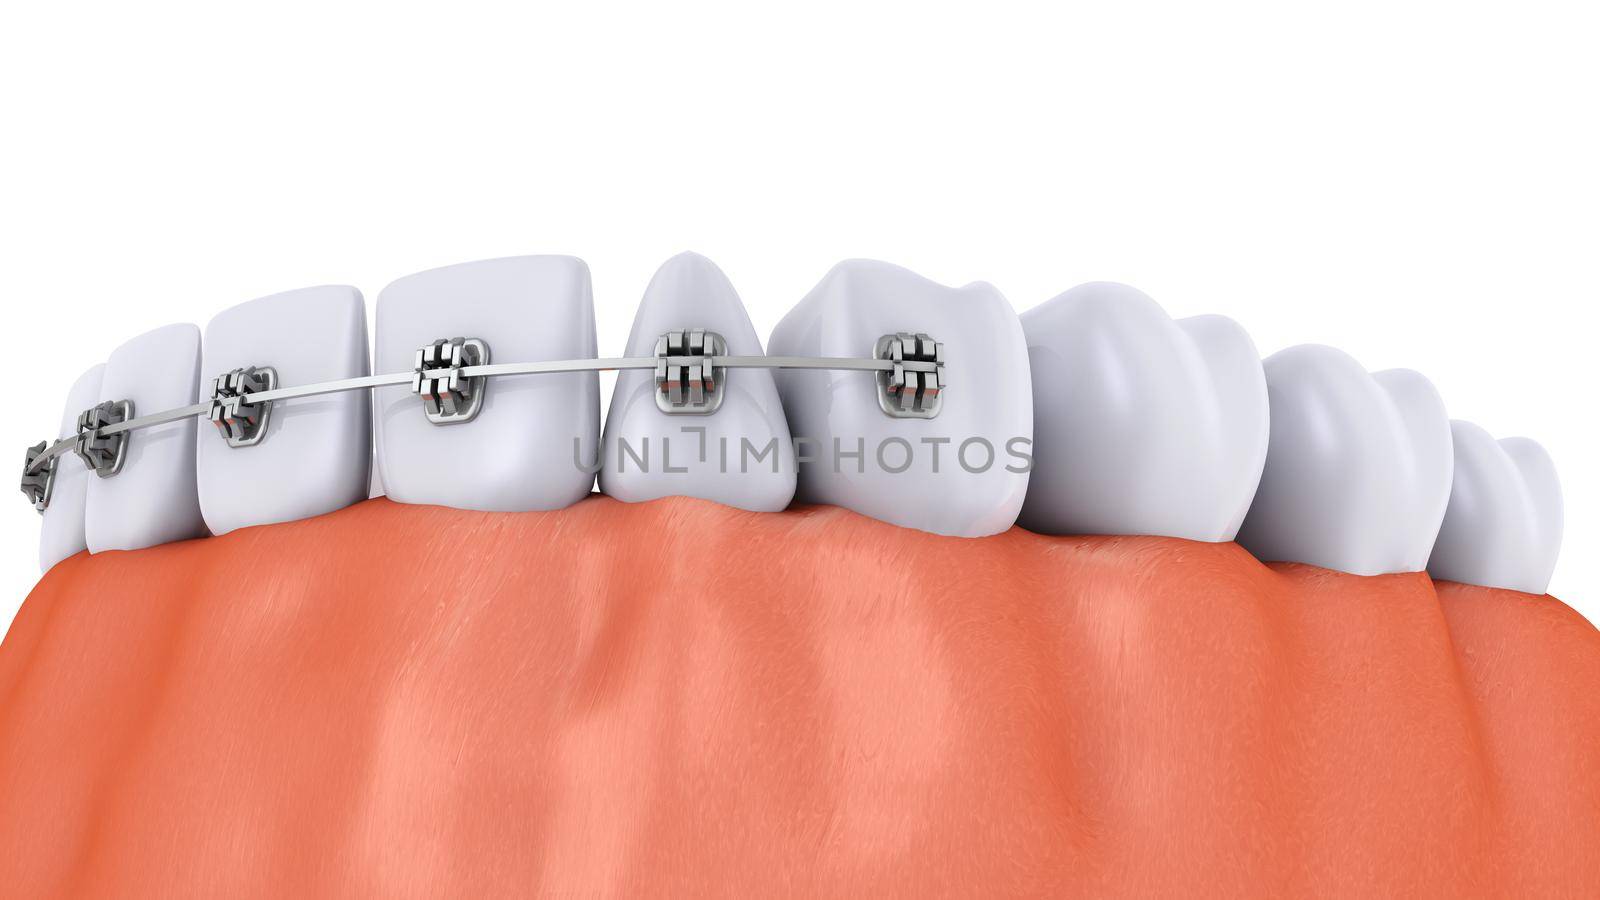 a teeth with braces and dental implants, 3d render